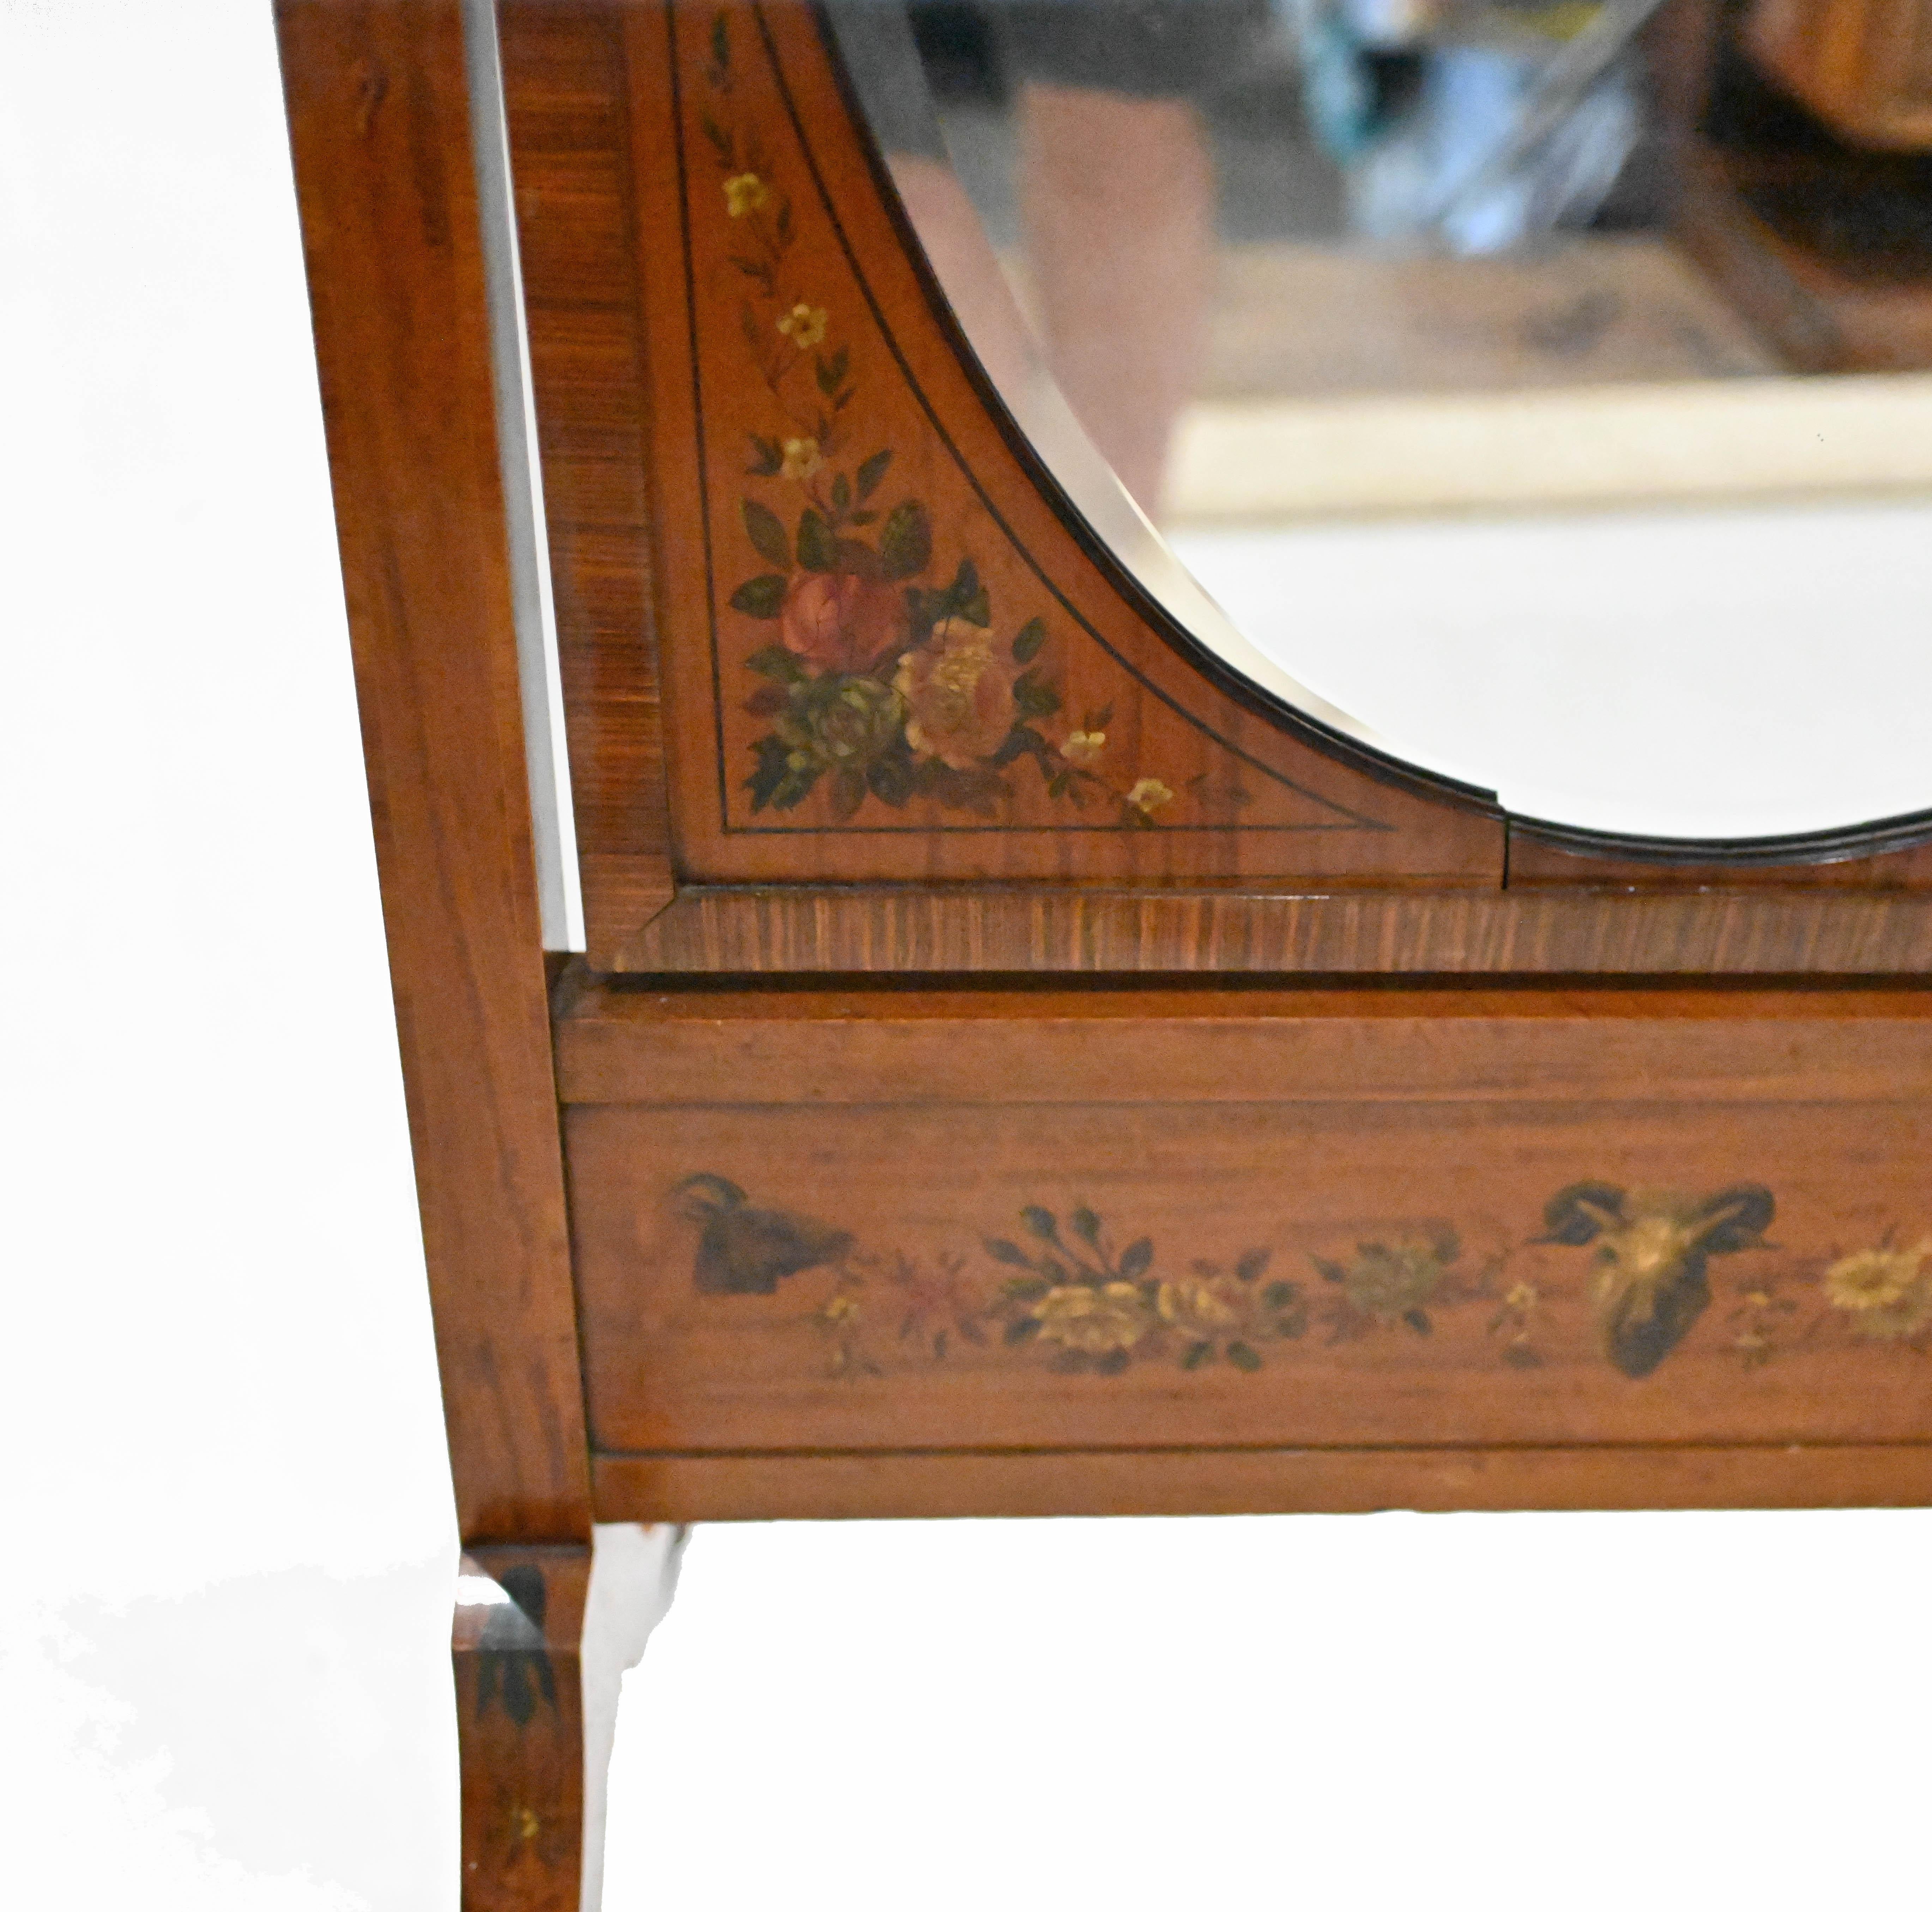 Gorgeous Edwardian cheval mirror in the Adams style
Hand crafted from satinwood with hand painted details, mainly floral motifs
Great floor standing mirror which swivels so good for dressing in front of
Oval glass is clear and blemish free
Bought